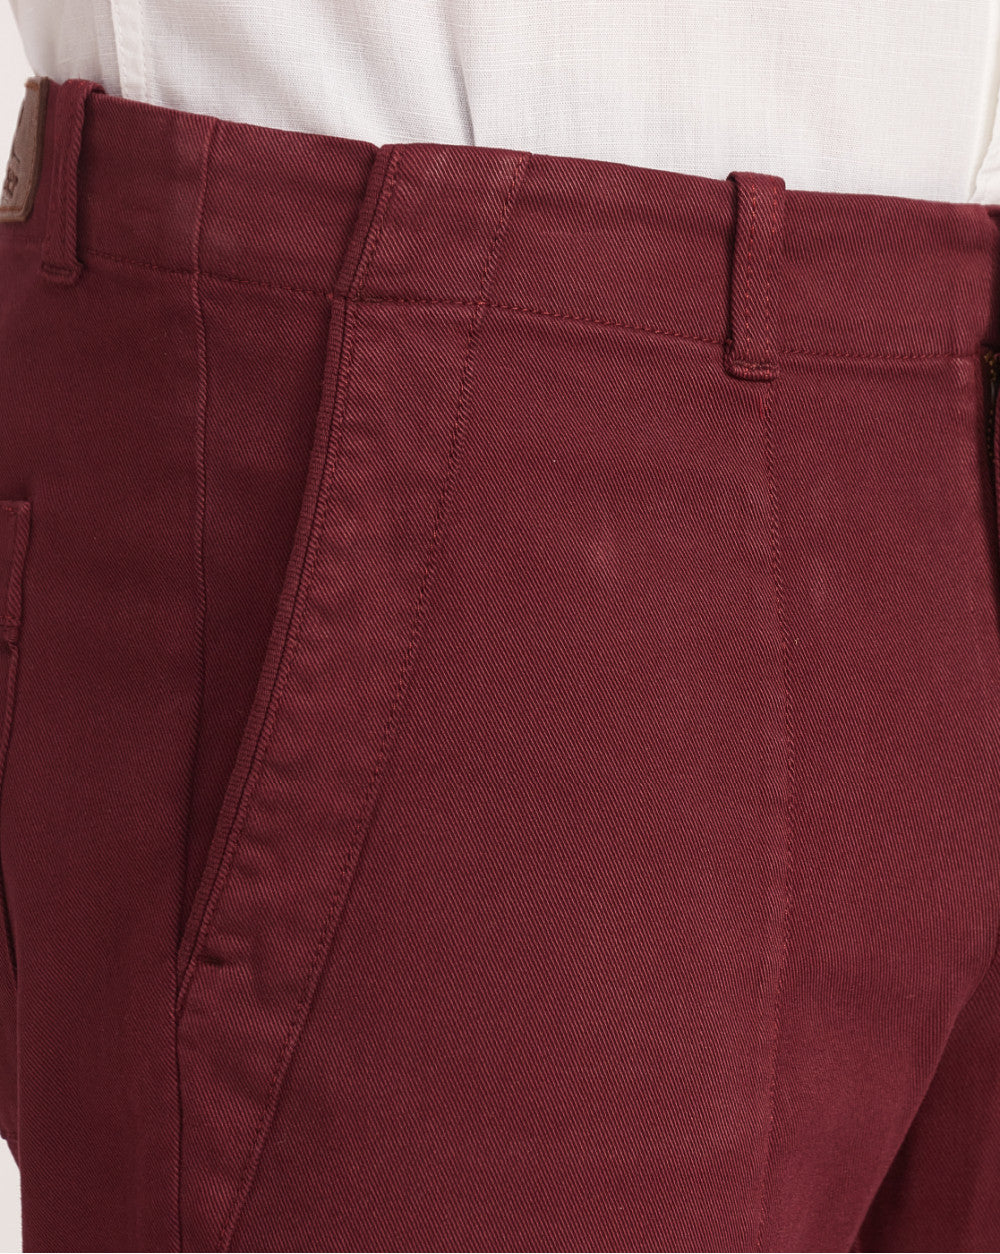 Straight Fit Garment Dyed Outdoor Chinos - Maroon